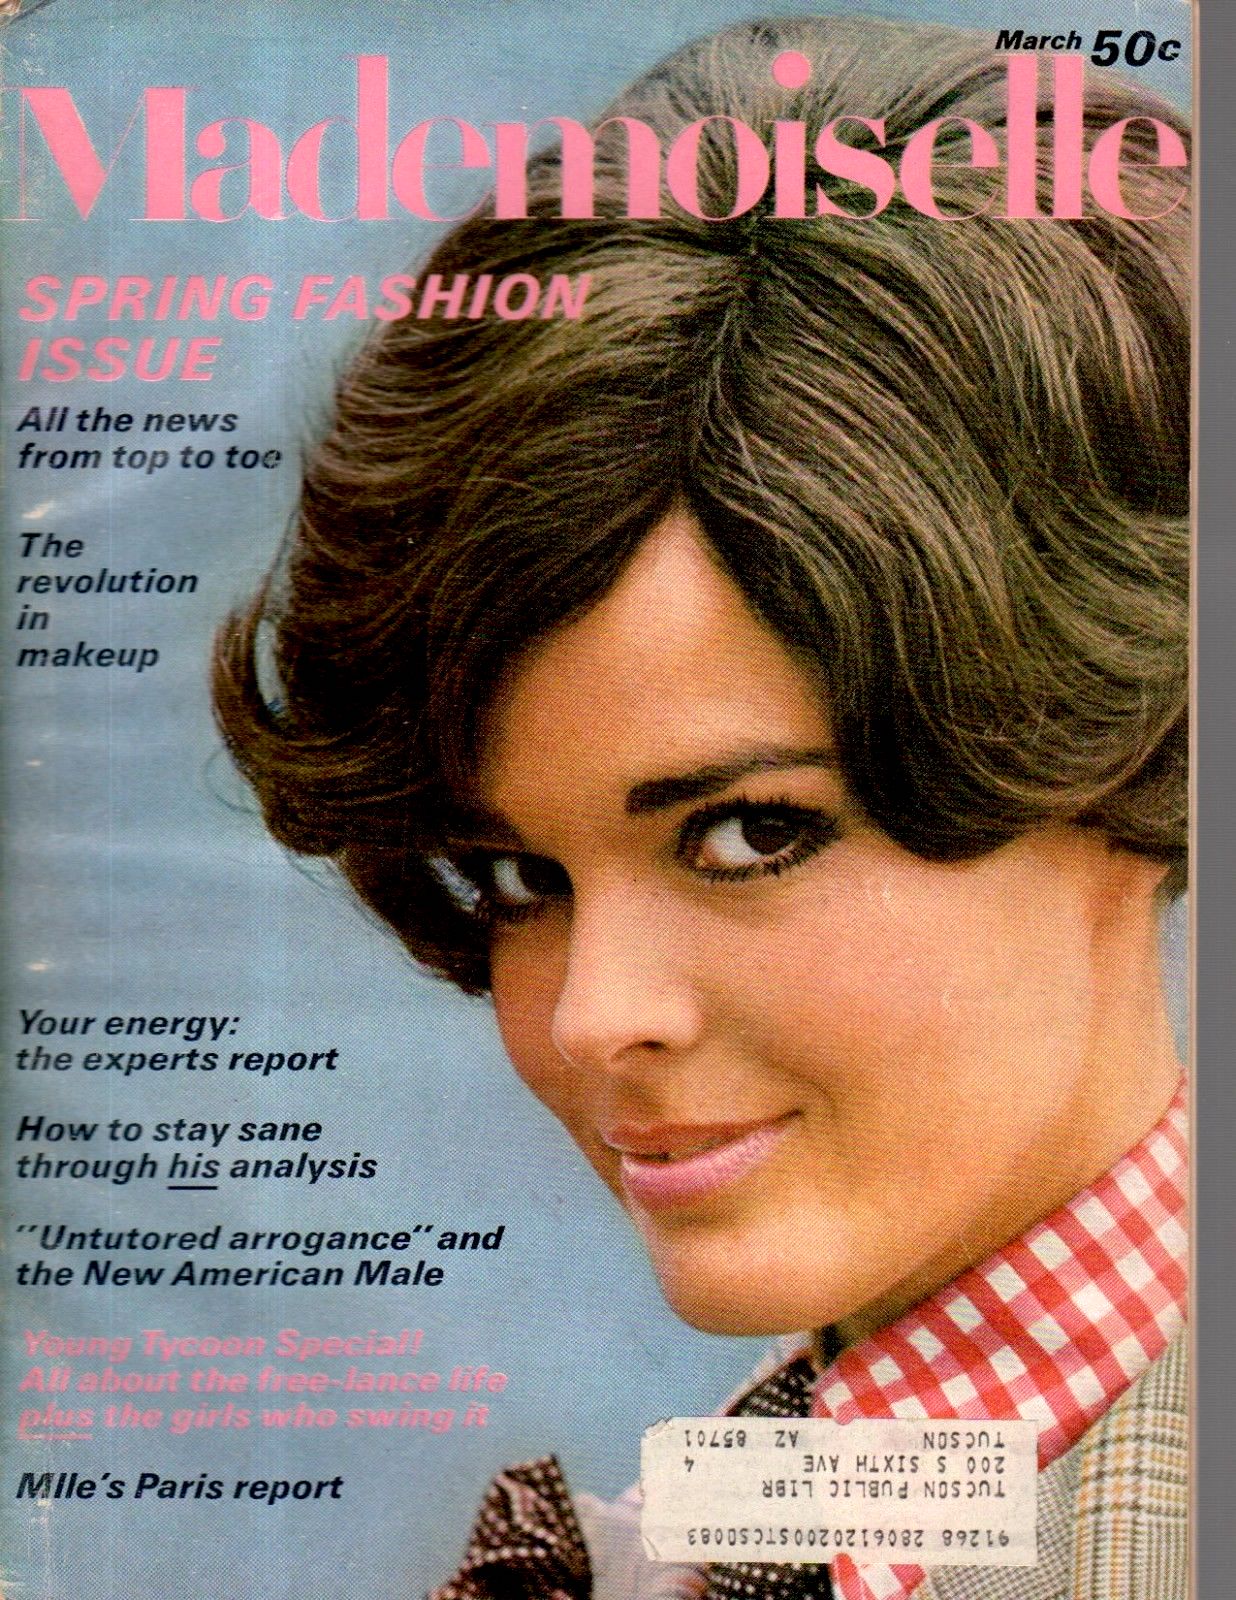 Pop Culture Safari!: Time Capsule: Magazine covers from March 1968